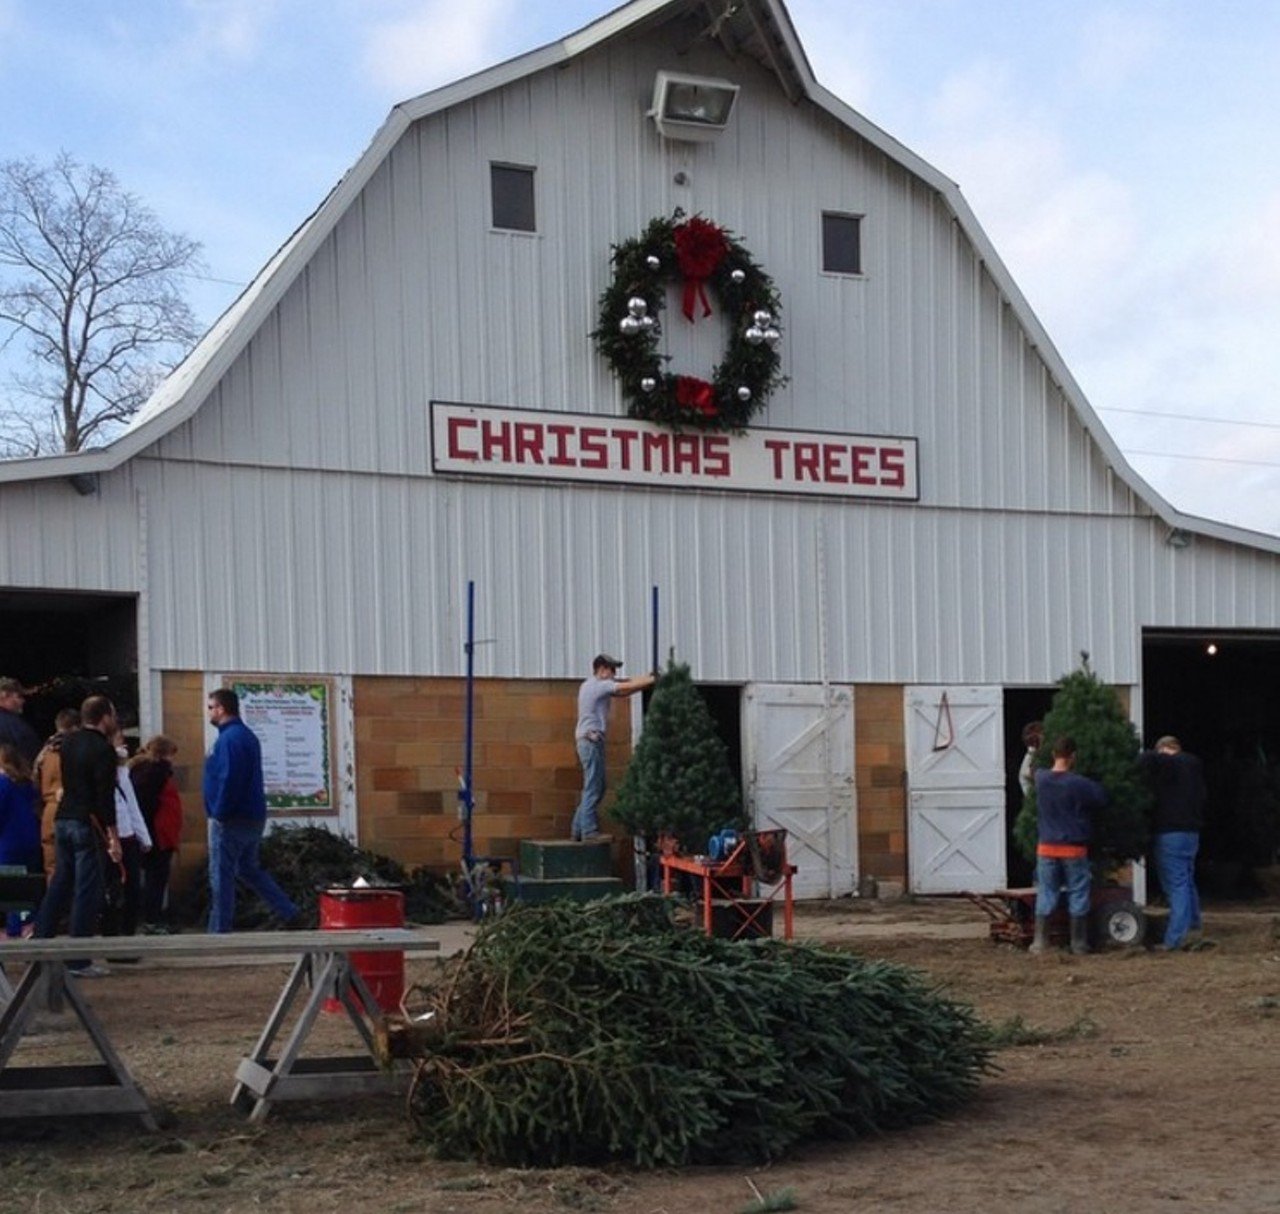 Daniken Tree Farm
781 IL-140
Pocahontas, IL 62275
(618)-664-4067
You'll have 70 acres of trees to choose from at Daniken Tree Farm, as well as hundreds of beautiful wreaths, thousands of feet of fresh garland and more. Finish off your trip with some shopping in the gift shop and some relaxation around the daily bonfires. We'd call it the perfect day. Photo courtesy of Instagram / mrwielgus.